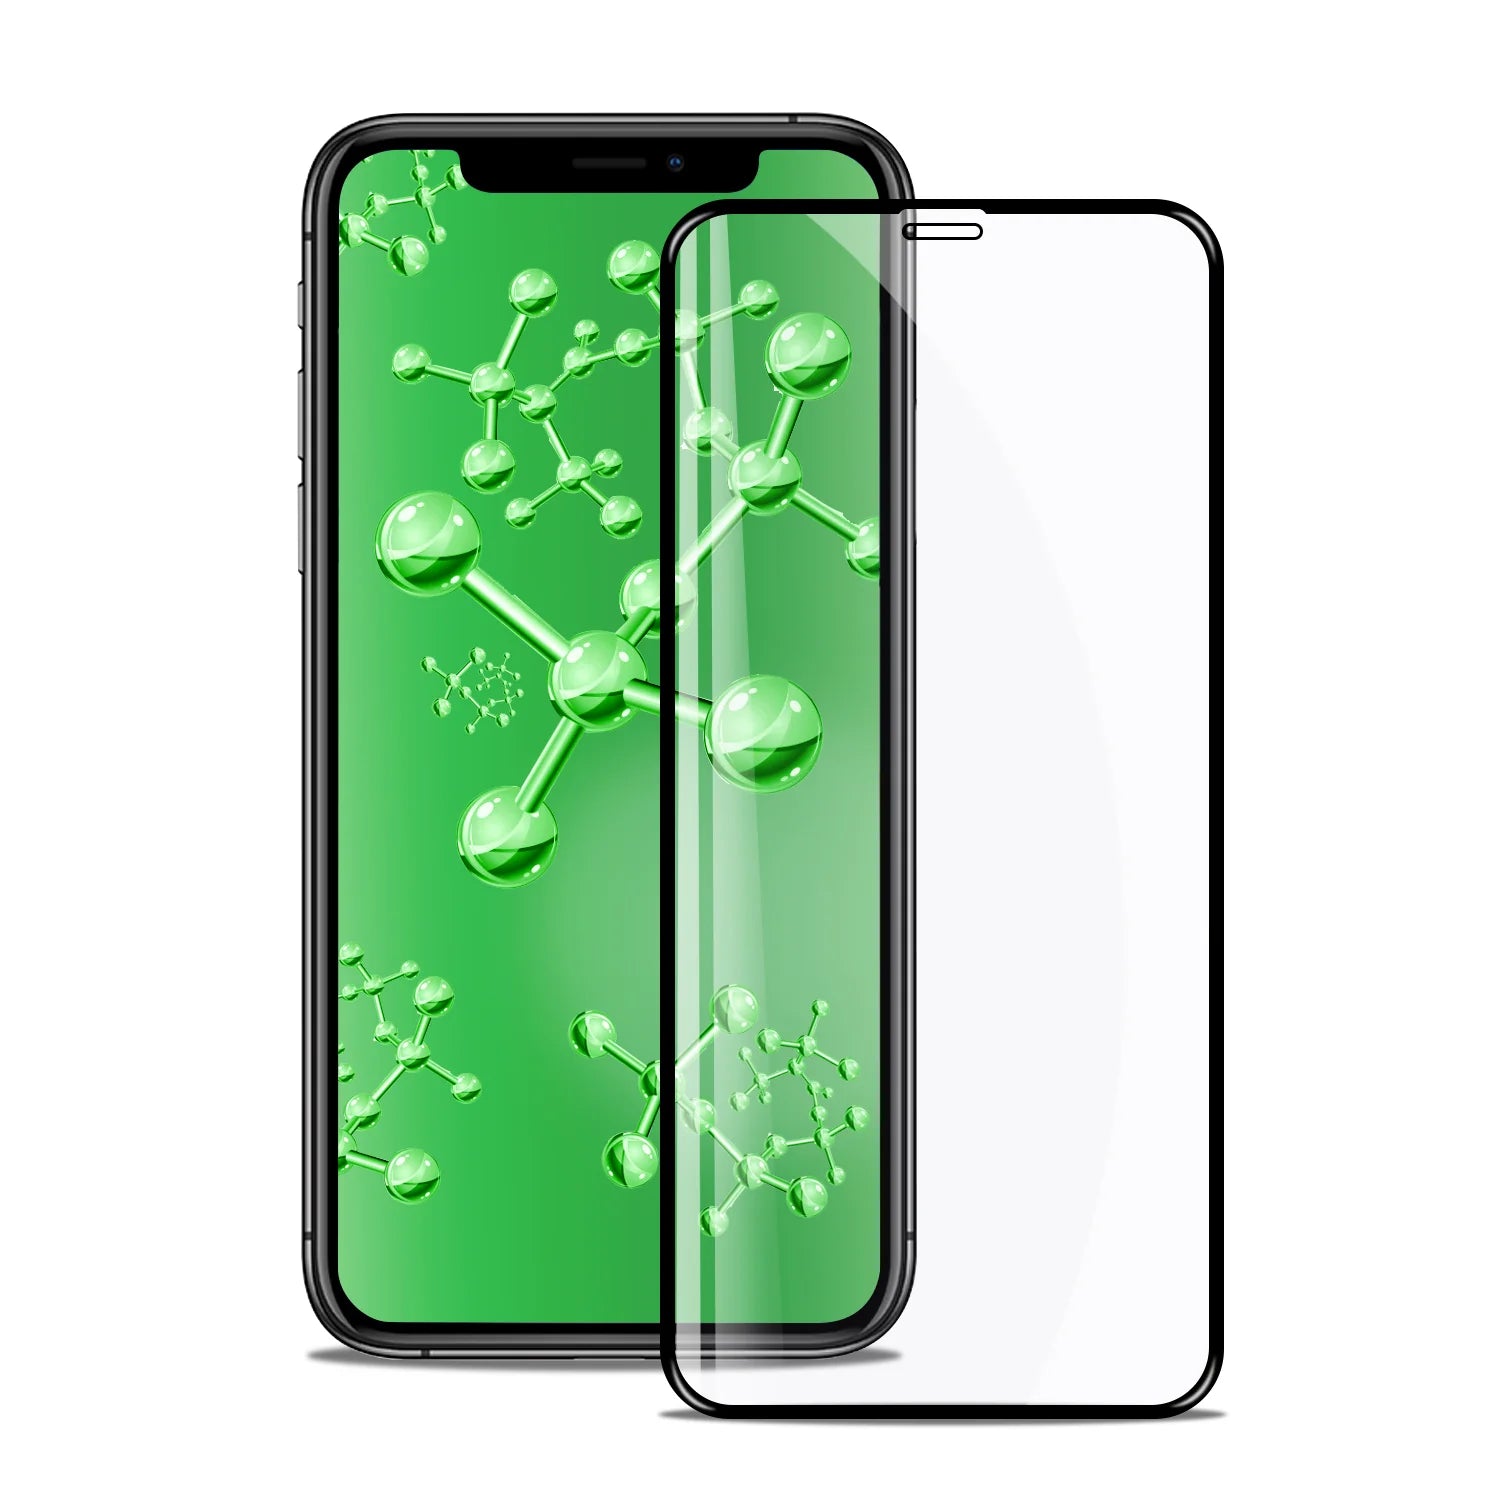 iPhone Xs, X & 11 Pro (5.8 inch) Tempered Glass Screen Protector *Free Shipping*